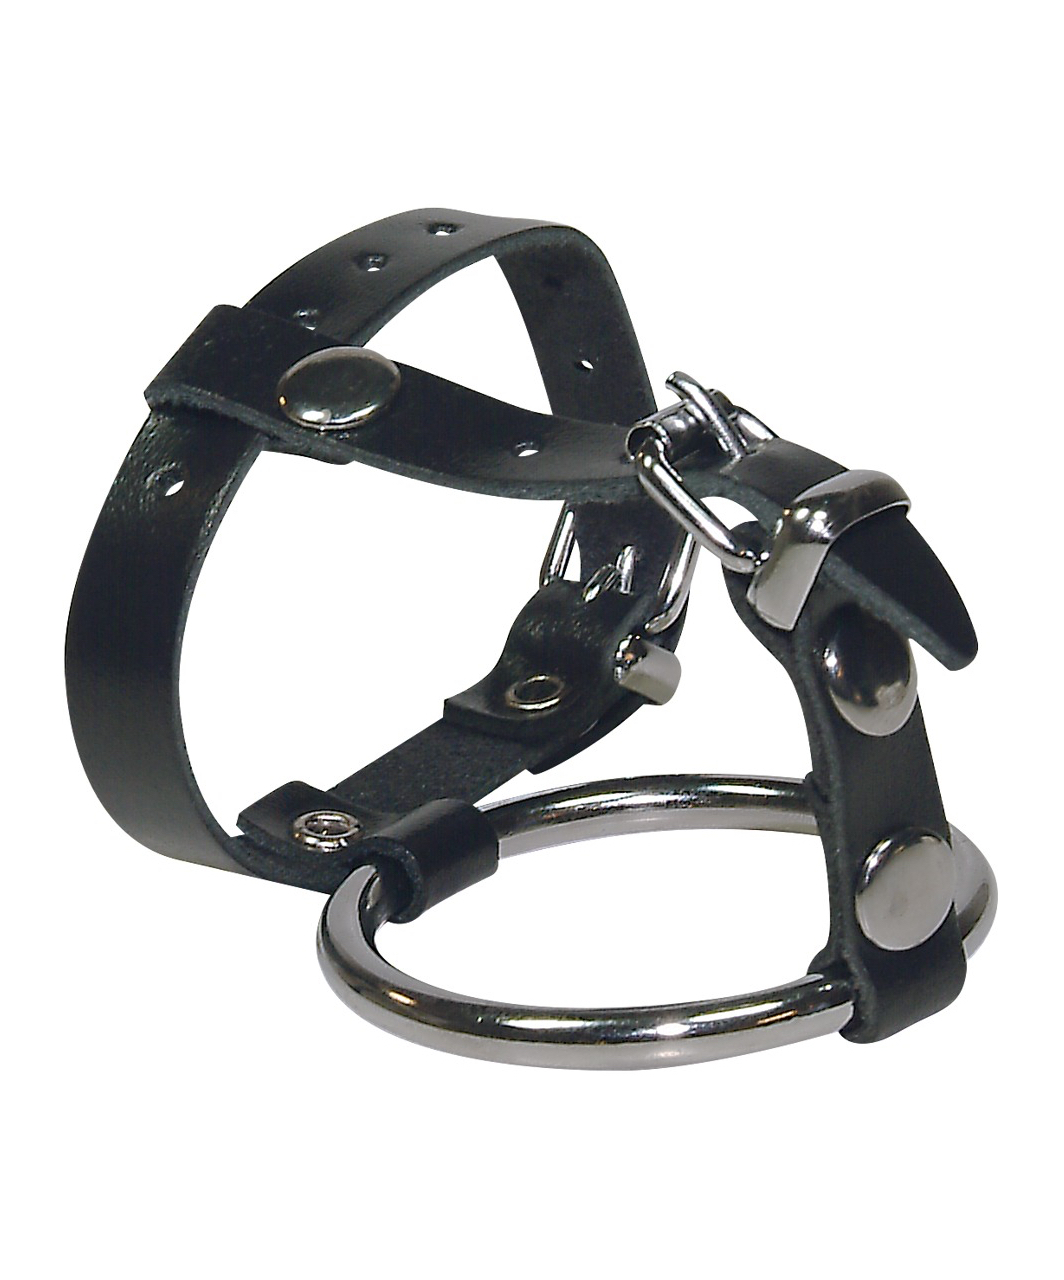 Sextreme metal cockring with leather strap